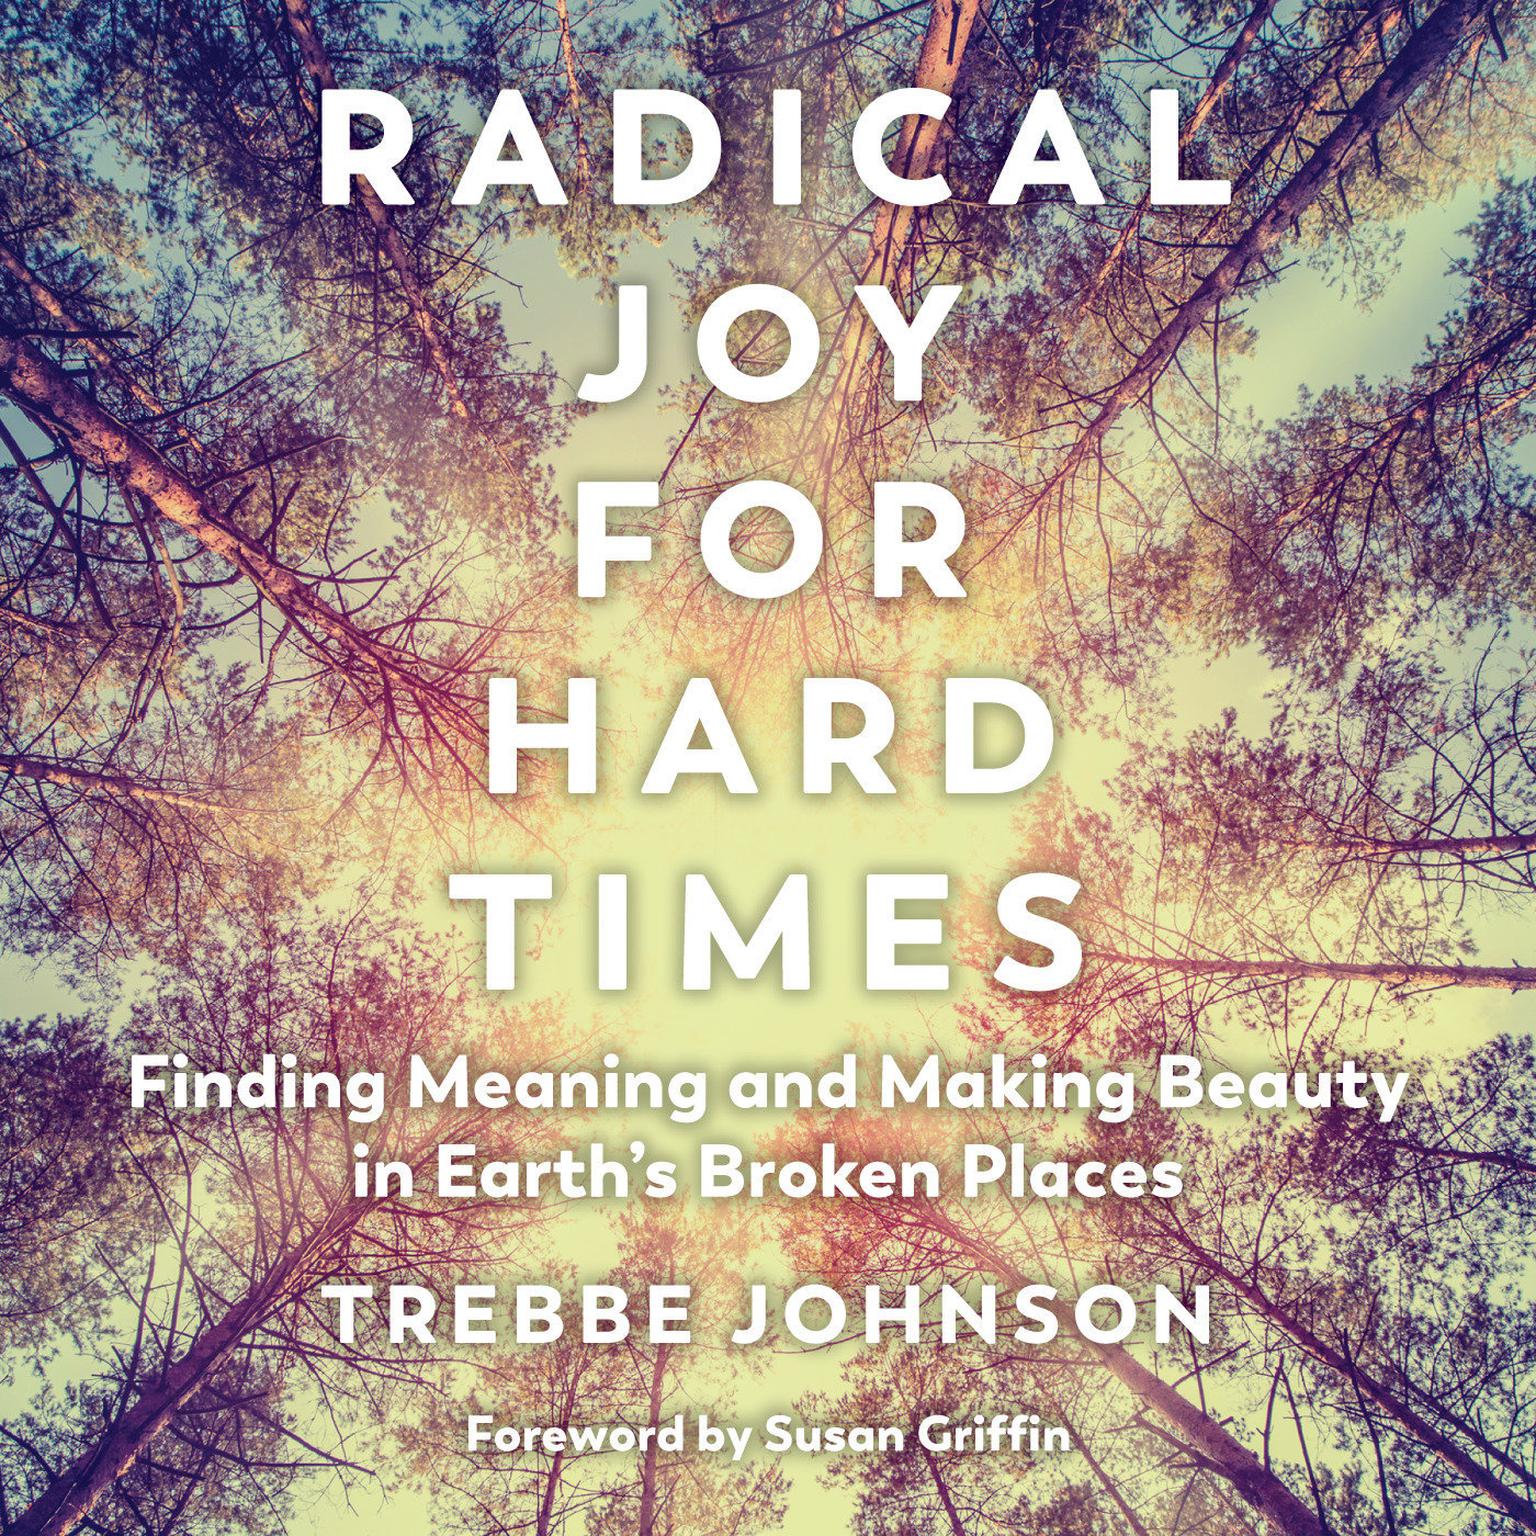 Radical Joy for Hard Times: Finding Meaning and Making Beauty in Earths Broken Places Audiobook, by Trebbe Johnson